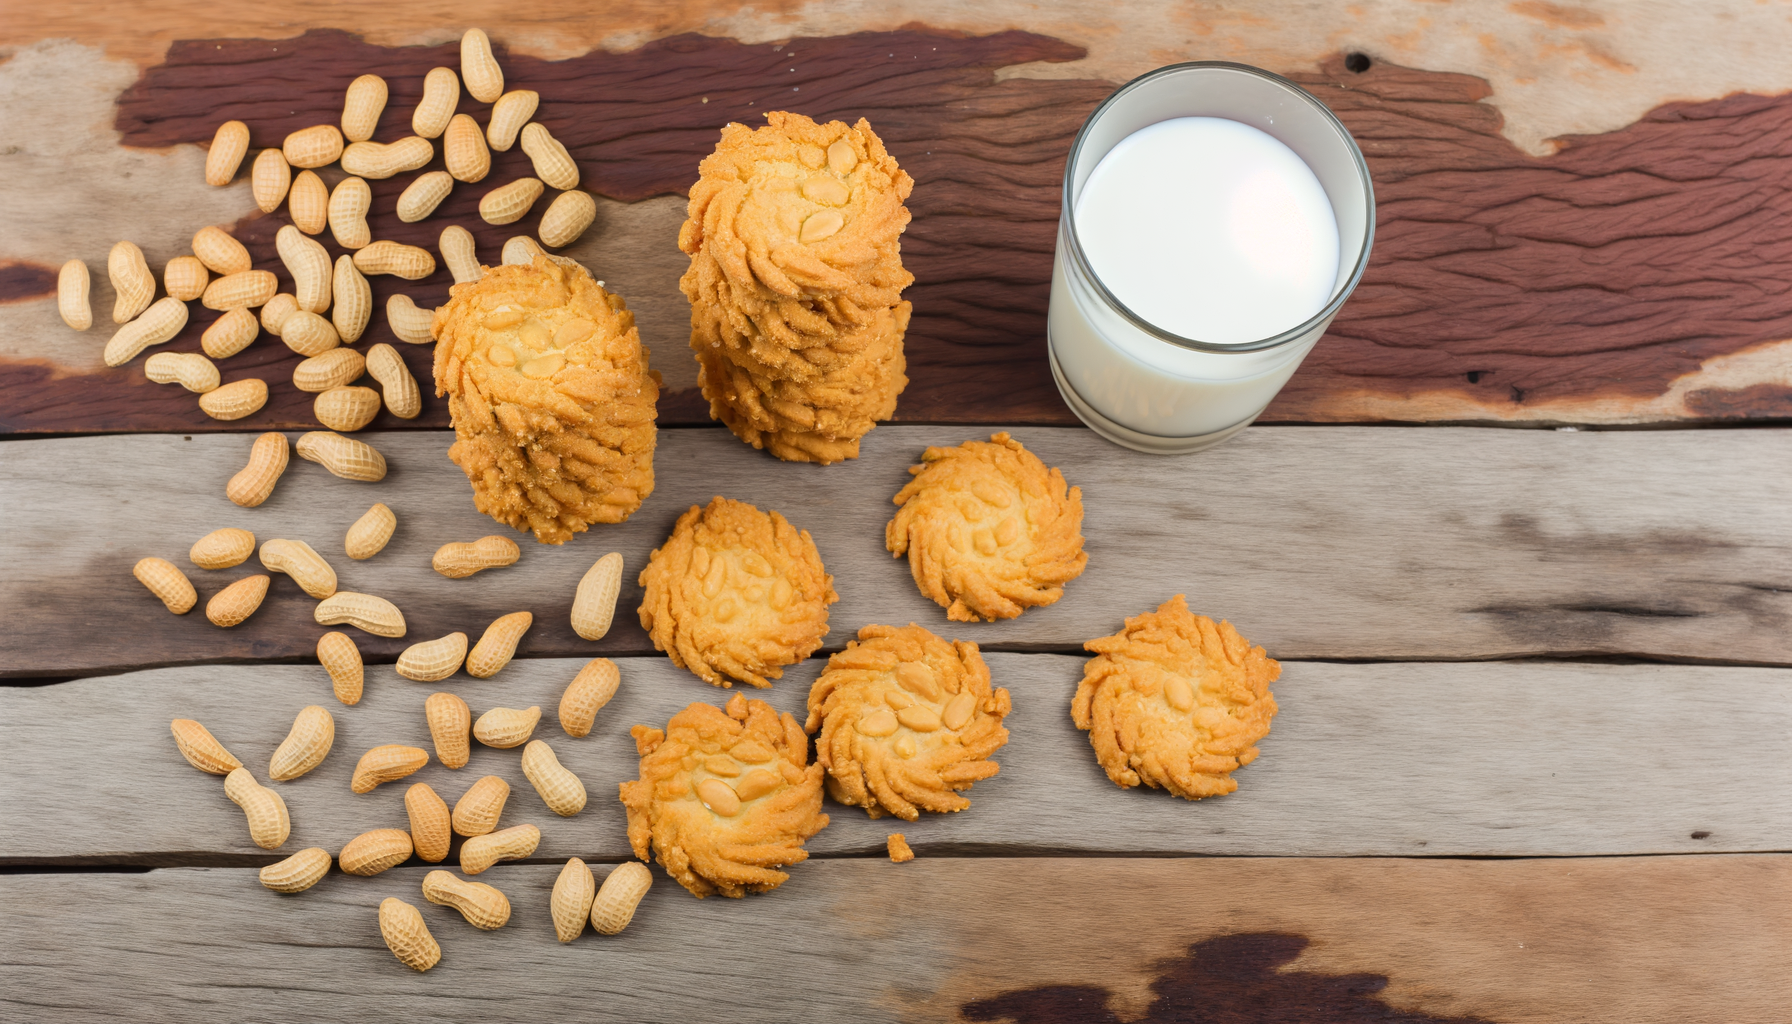 Close-up of peanut butter haystacks on a wooden table with peanuts and a glass of milk.